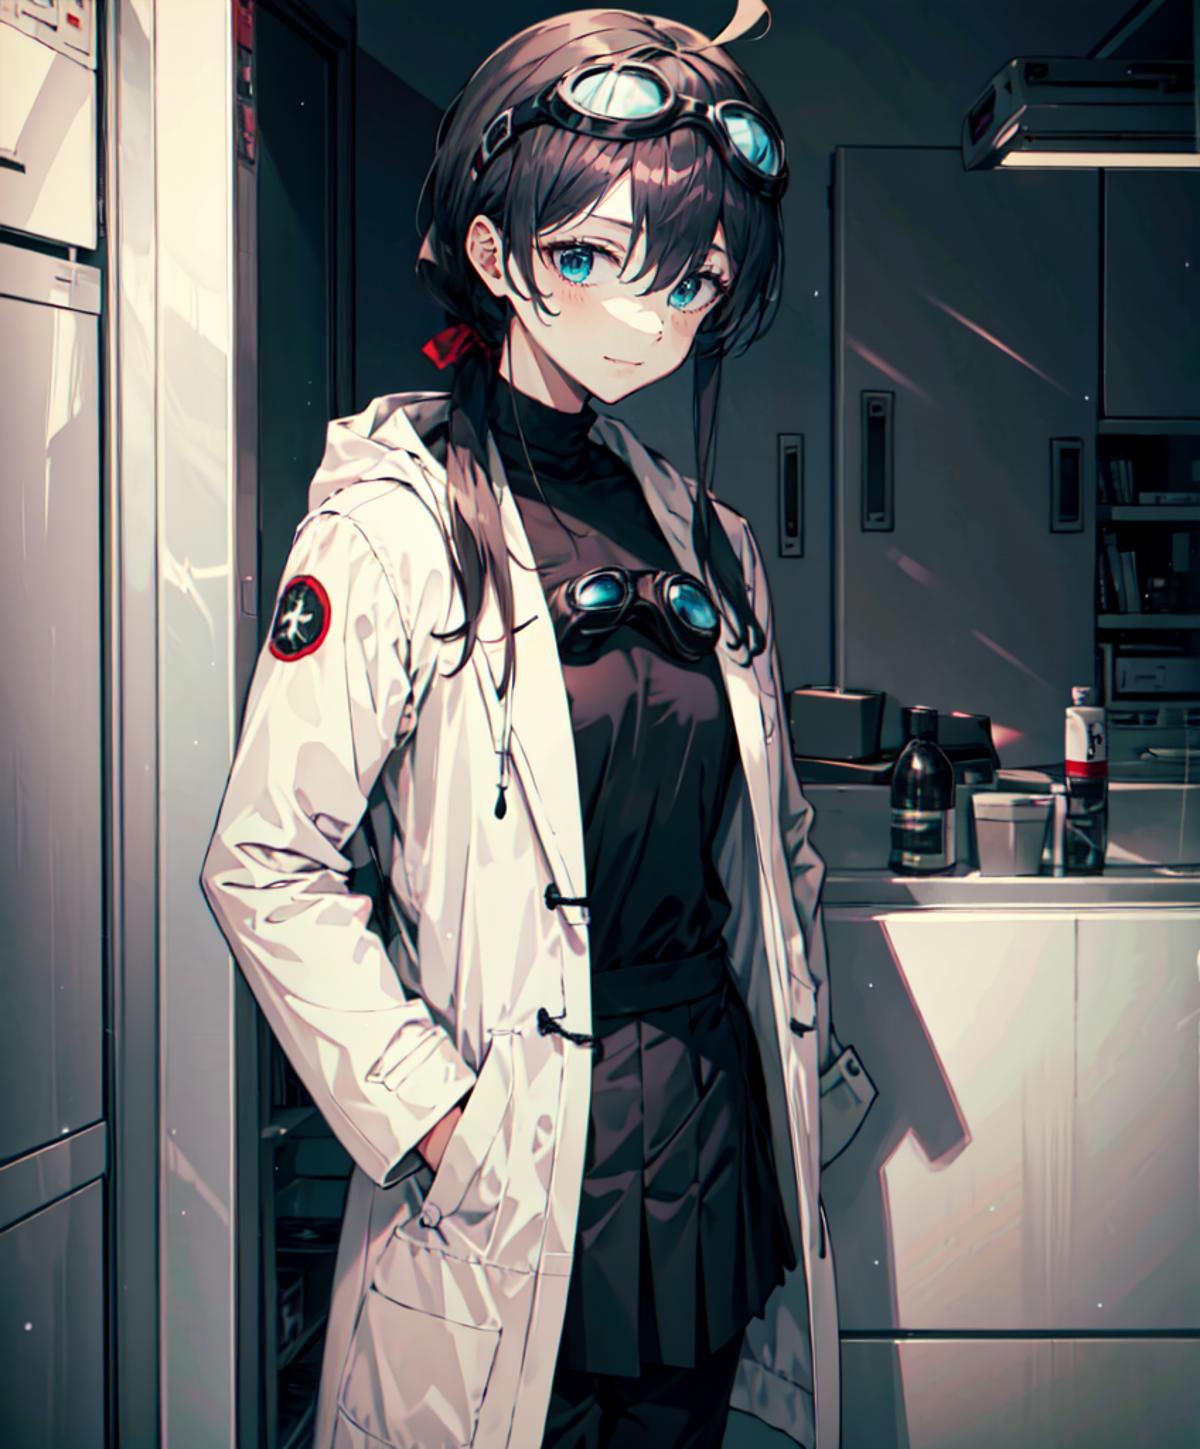 Fuwari (ふわり) - Style image by Maxetto